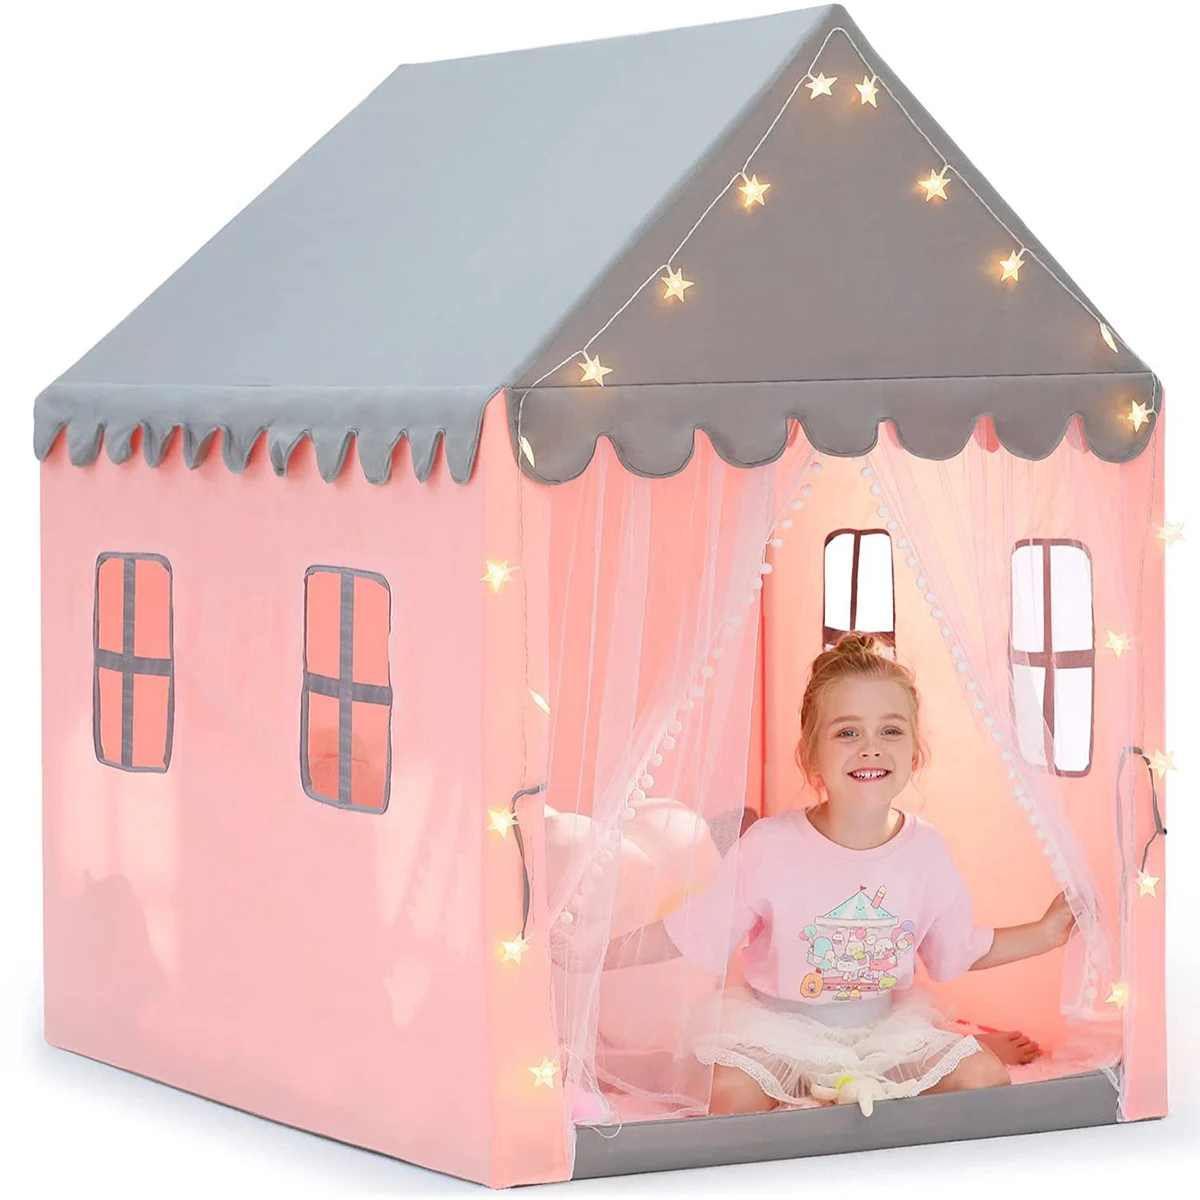 Children Princess Castle Tents Portable Indoor Outdoor Teepee Tent for kids Folding Play Tent House Baby Balls Pool Playhouse